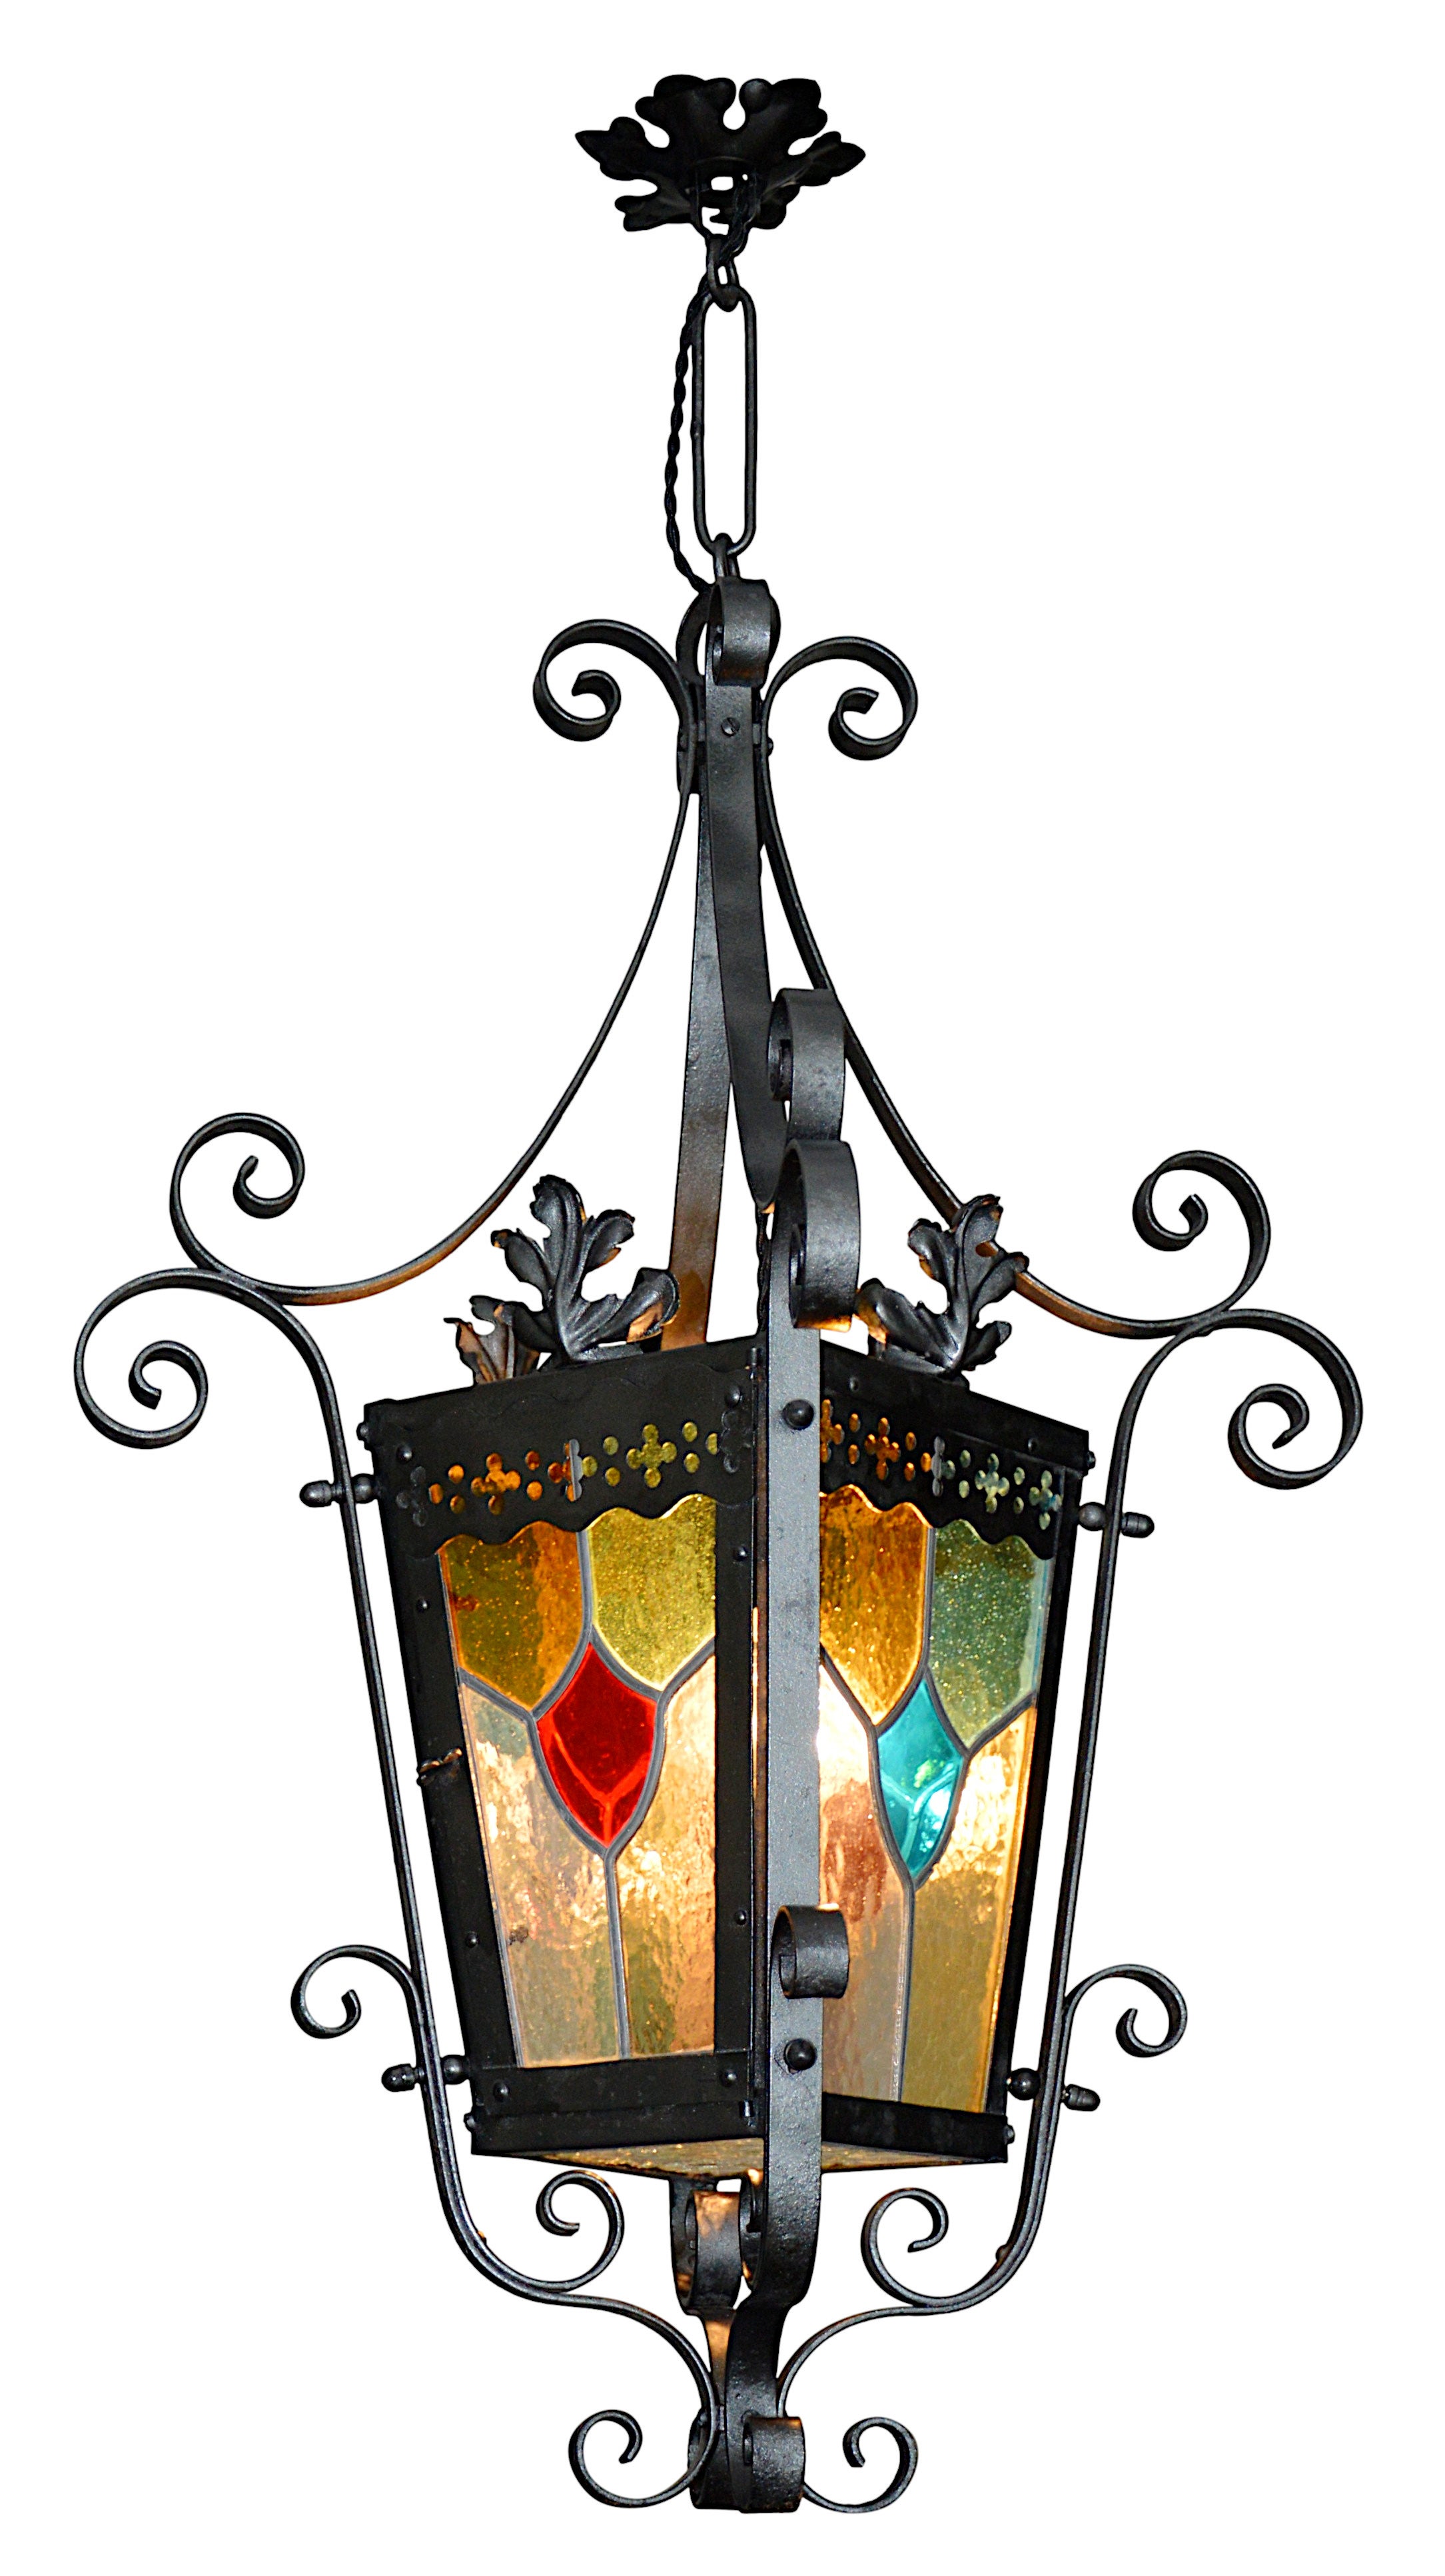 French Art Nouveau stained-glass lantern, France, 1890-1900. Stained-glass and iron. Full height: 34